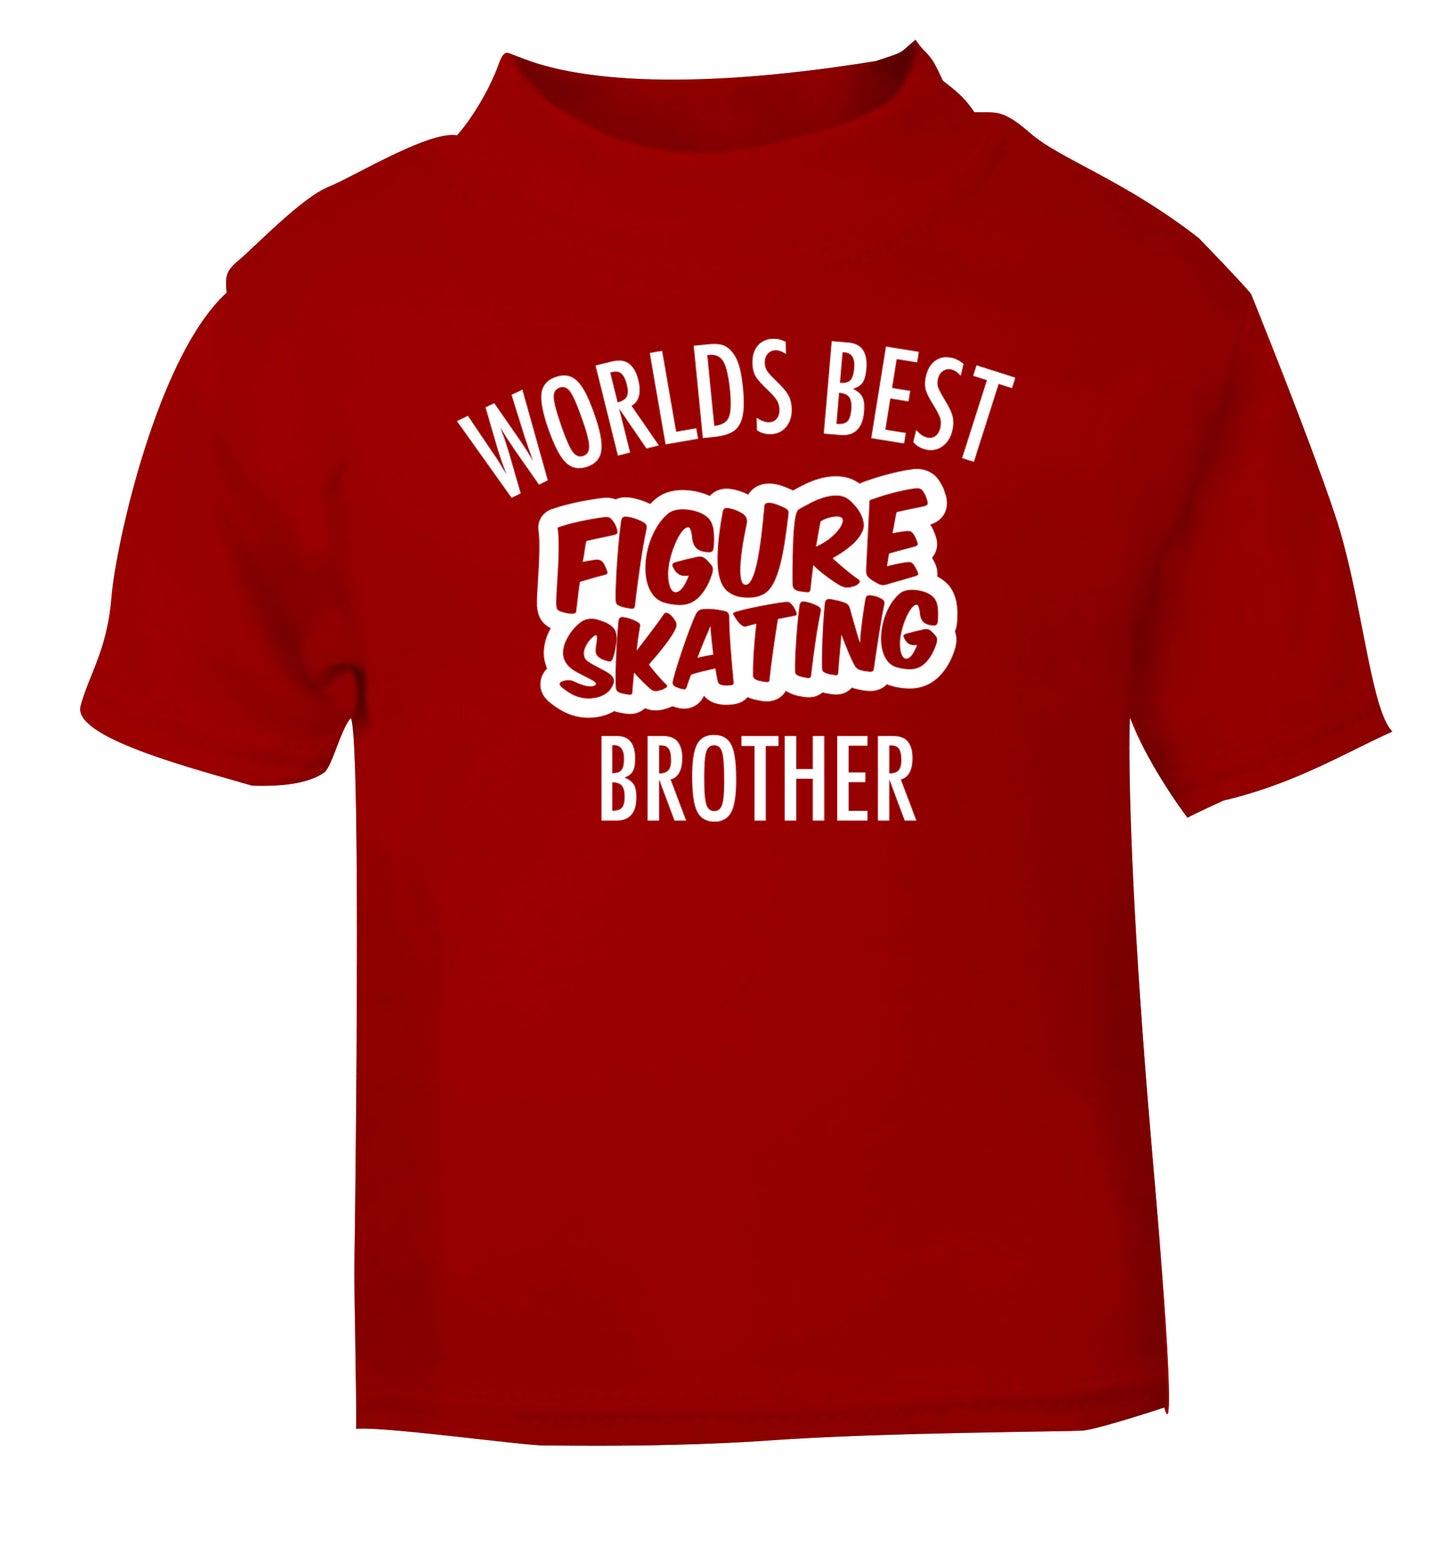 Worlds best figure skating brother red Baby Toddler Tshirt 2 Years